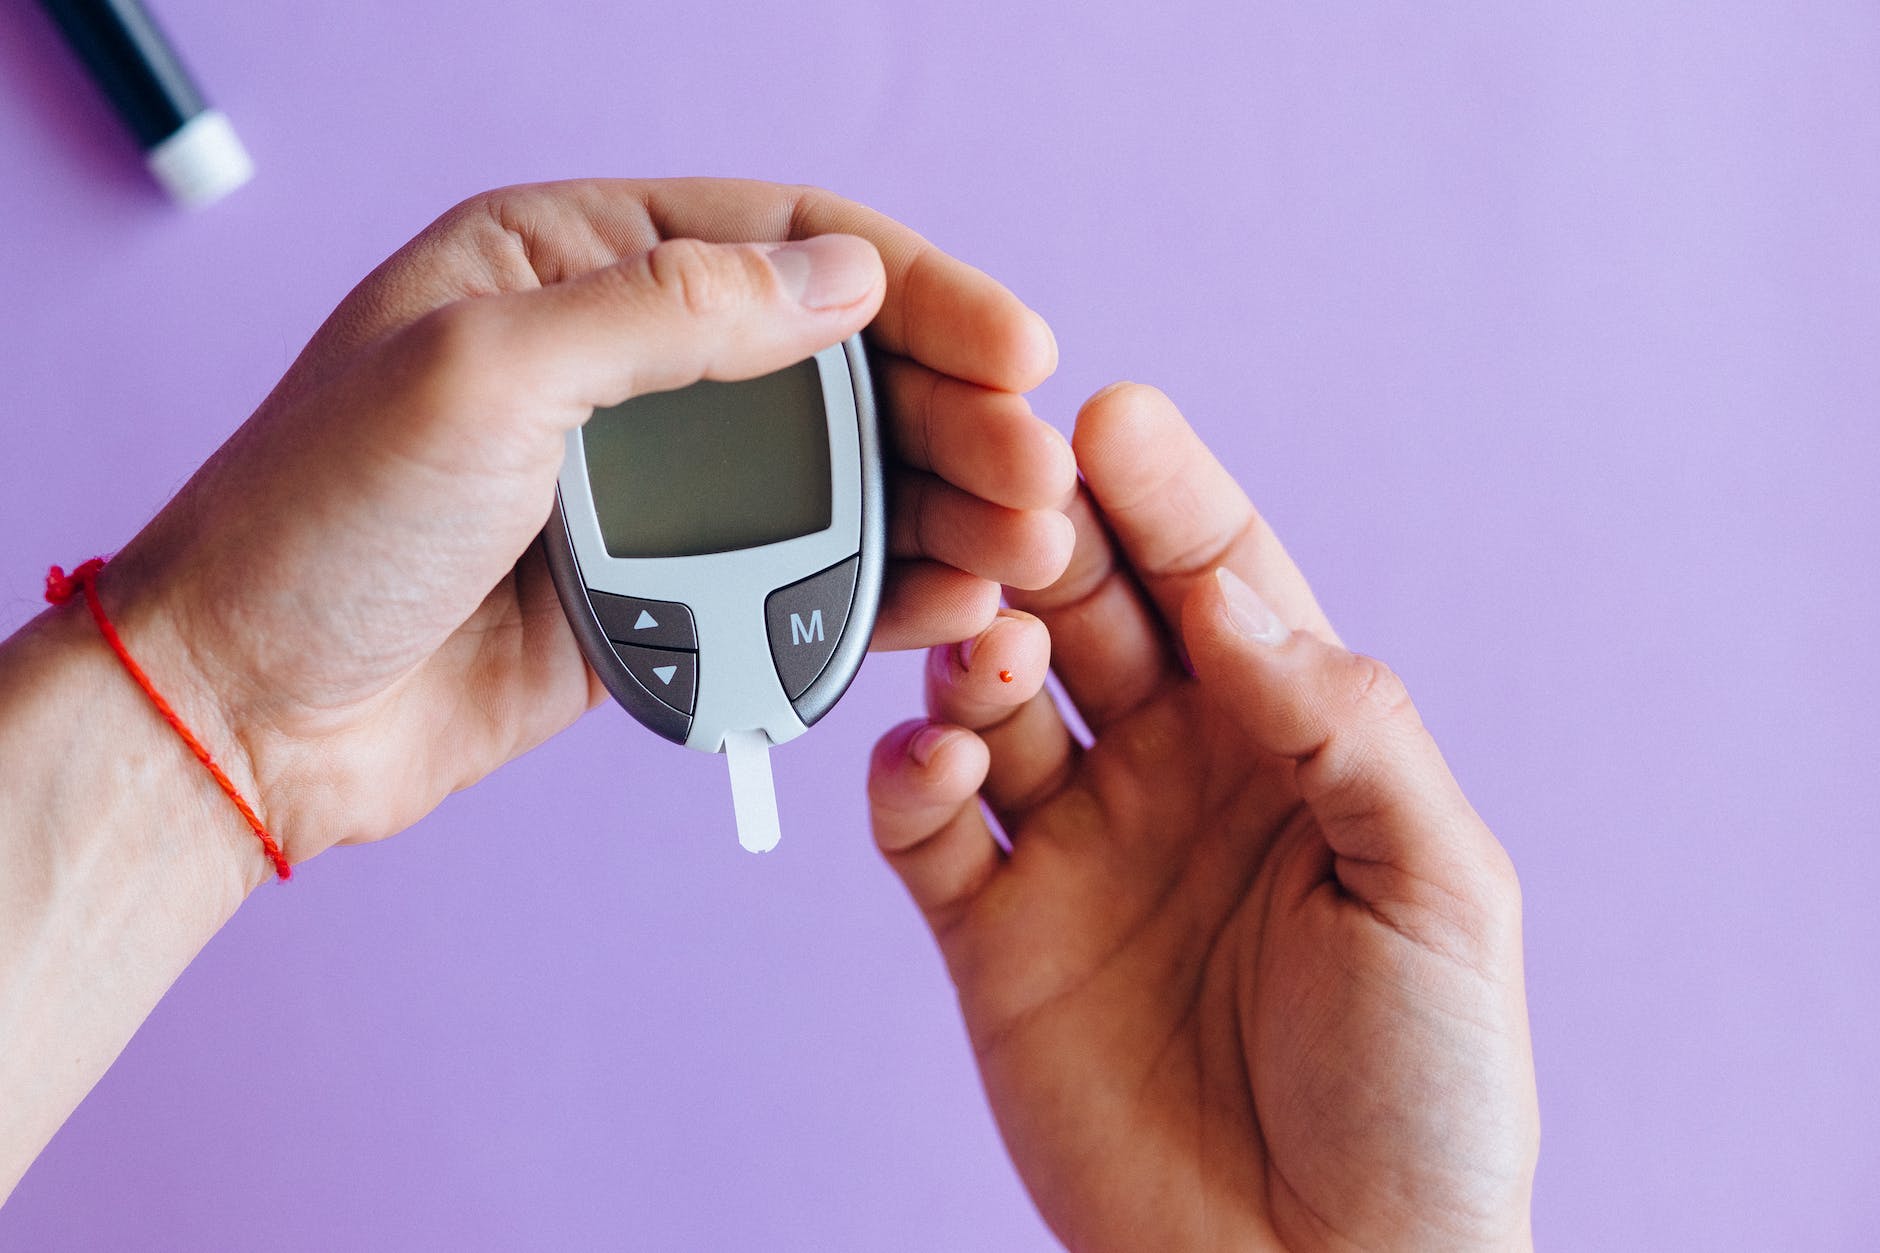 person holding a glucose meter